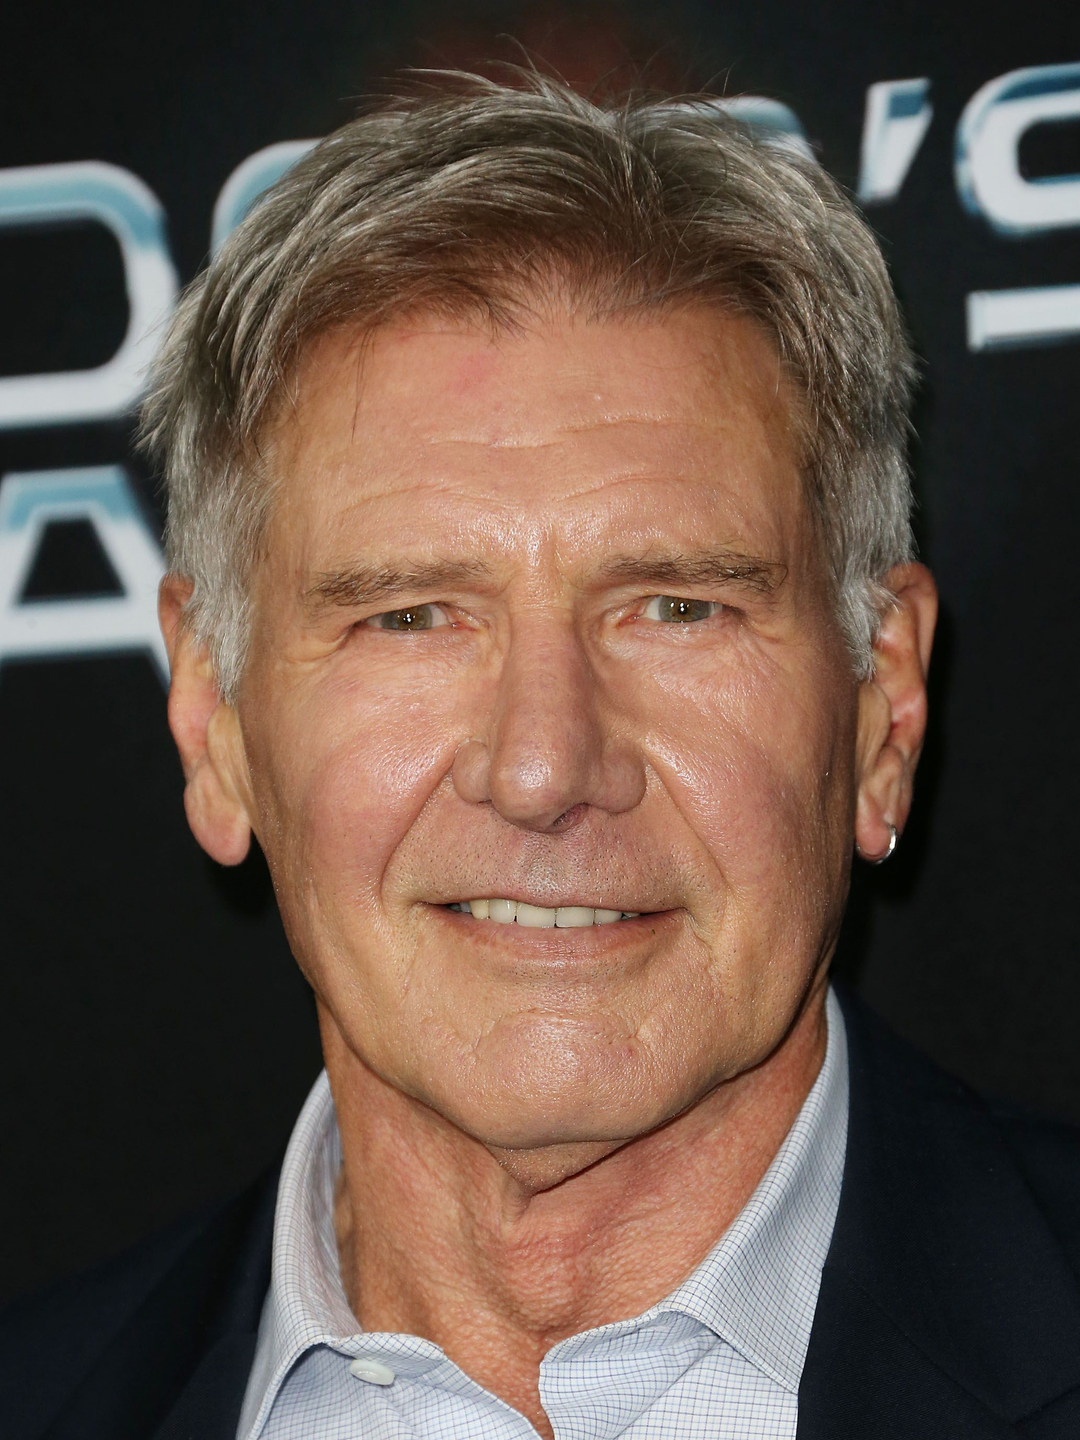 Harrison Ford early childhood